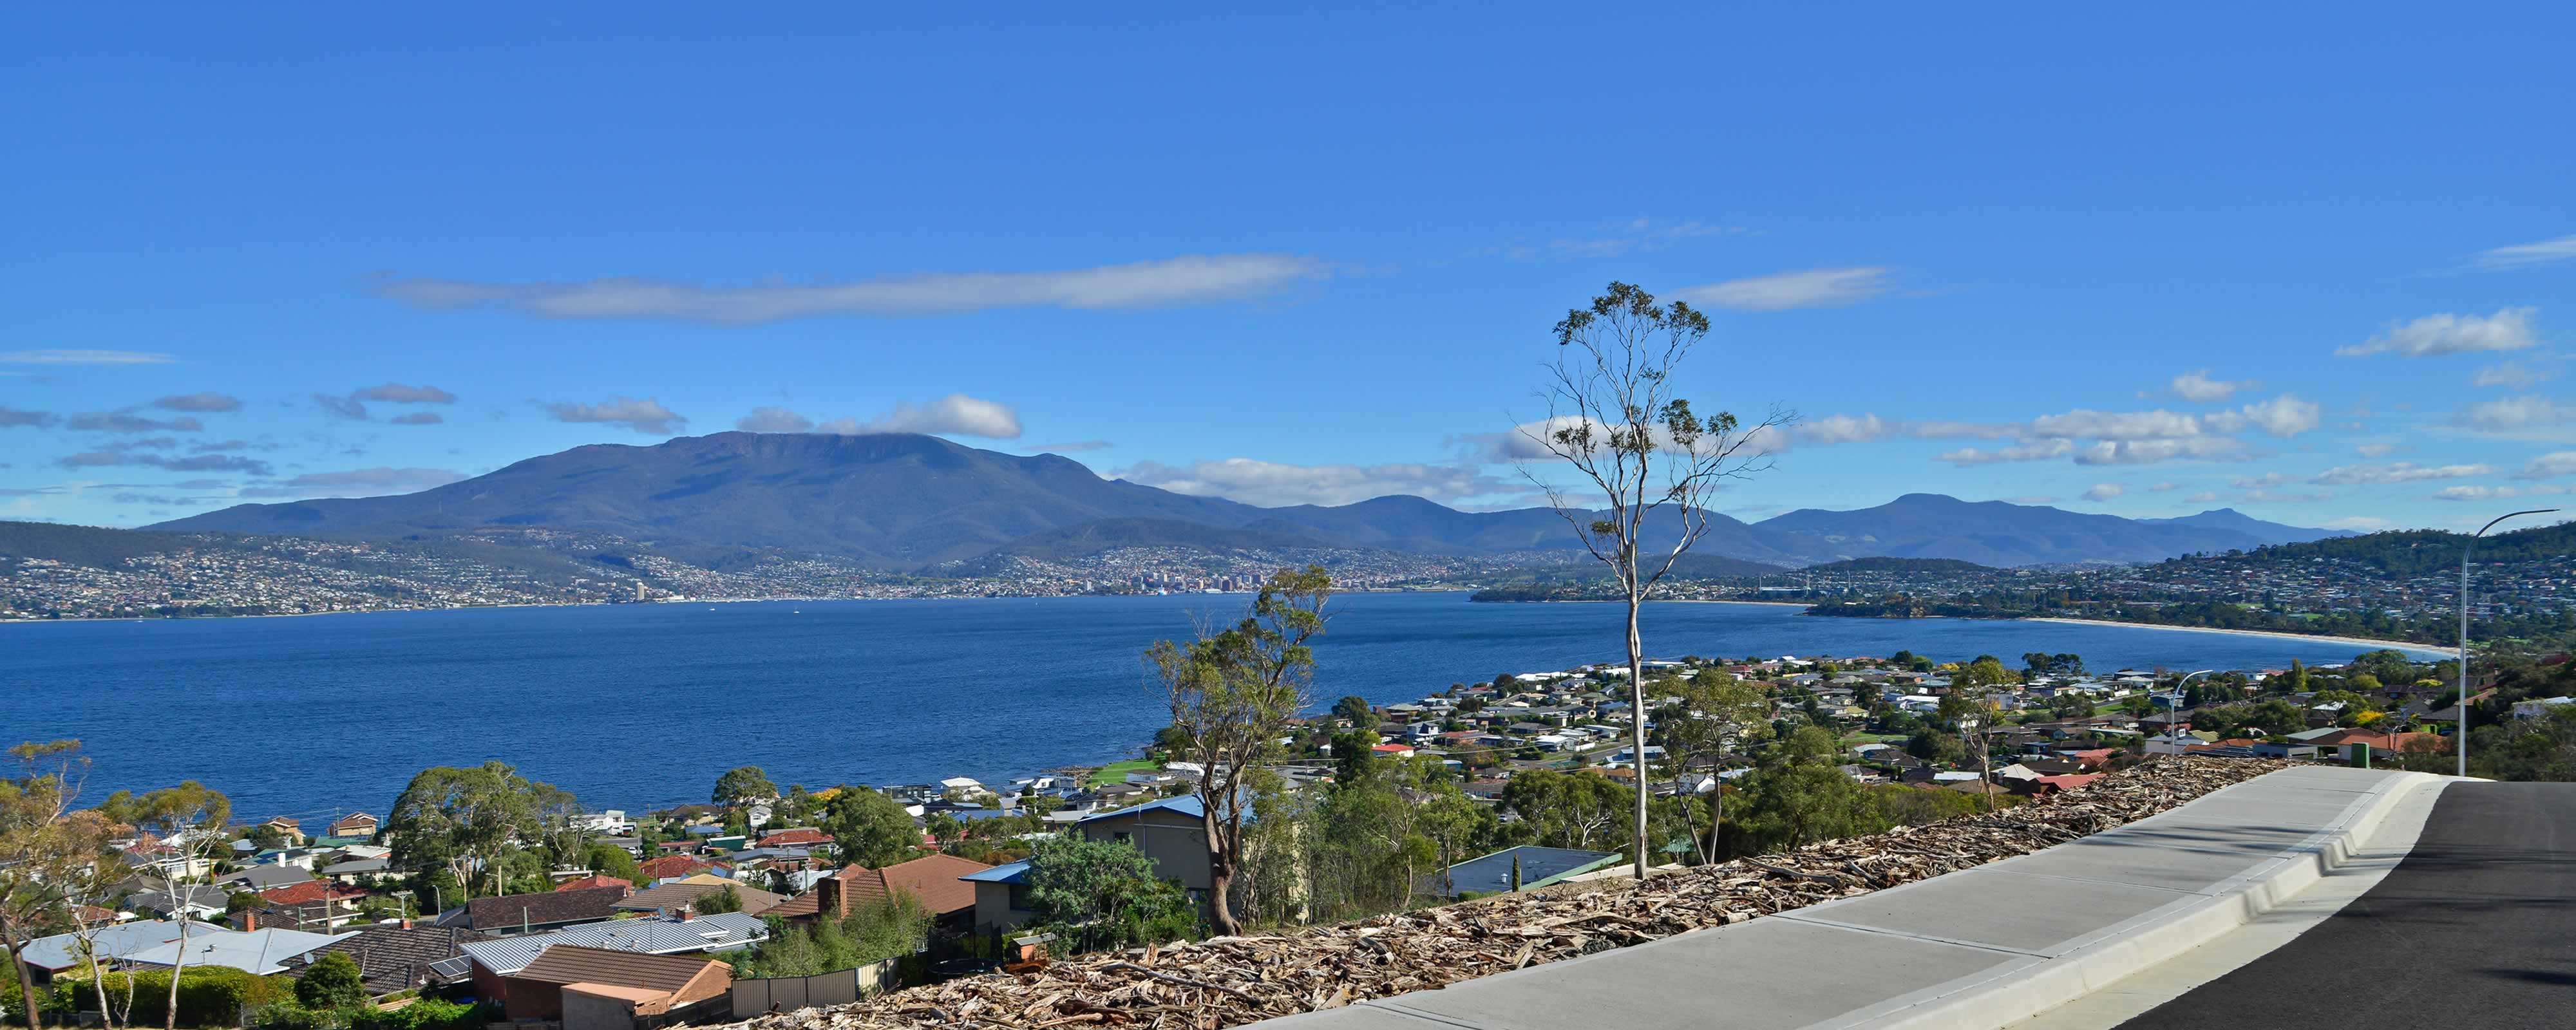 Daytime view from Tunah Street across the River Derwent looking towards kunanyi / Mount Wellington. Photo: Owen Fielding.